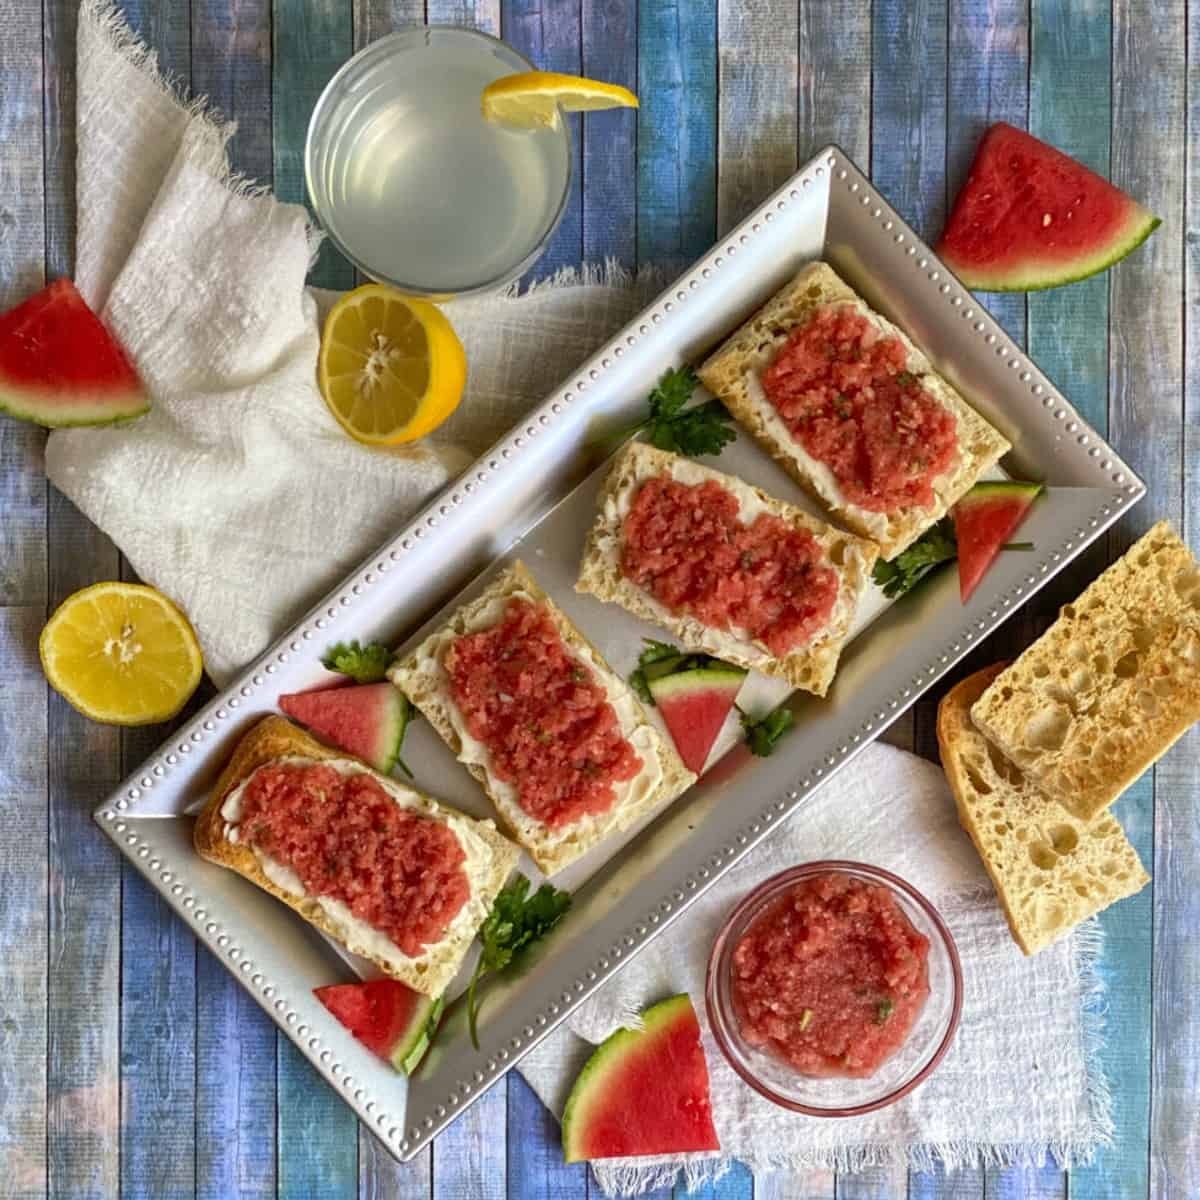 A rectangular tray with a slice of bread in the center. The bread is topped with a mixture of diced red and yellow crimson watermelon, chopped fresh mint, and a white feta cheese.